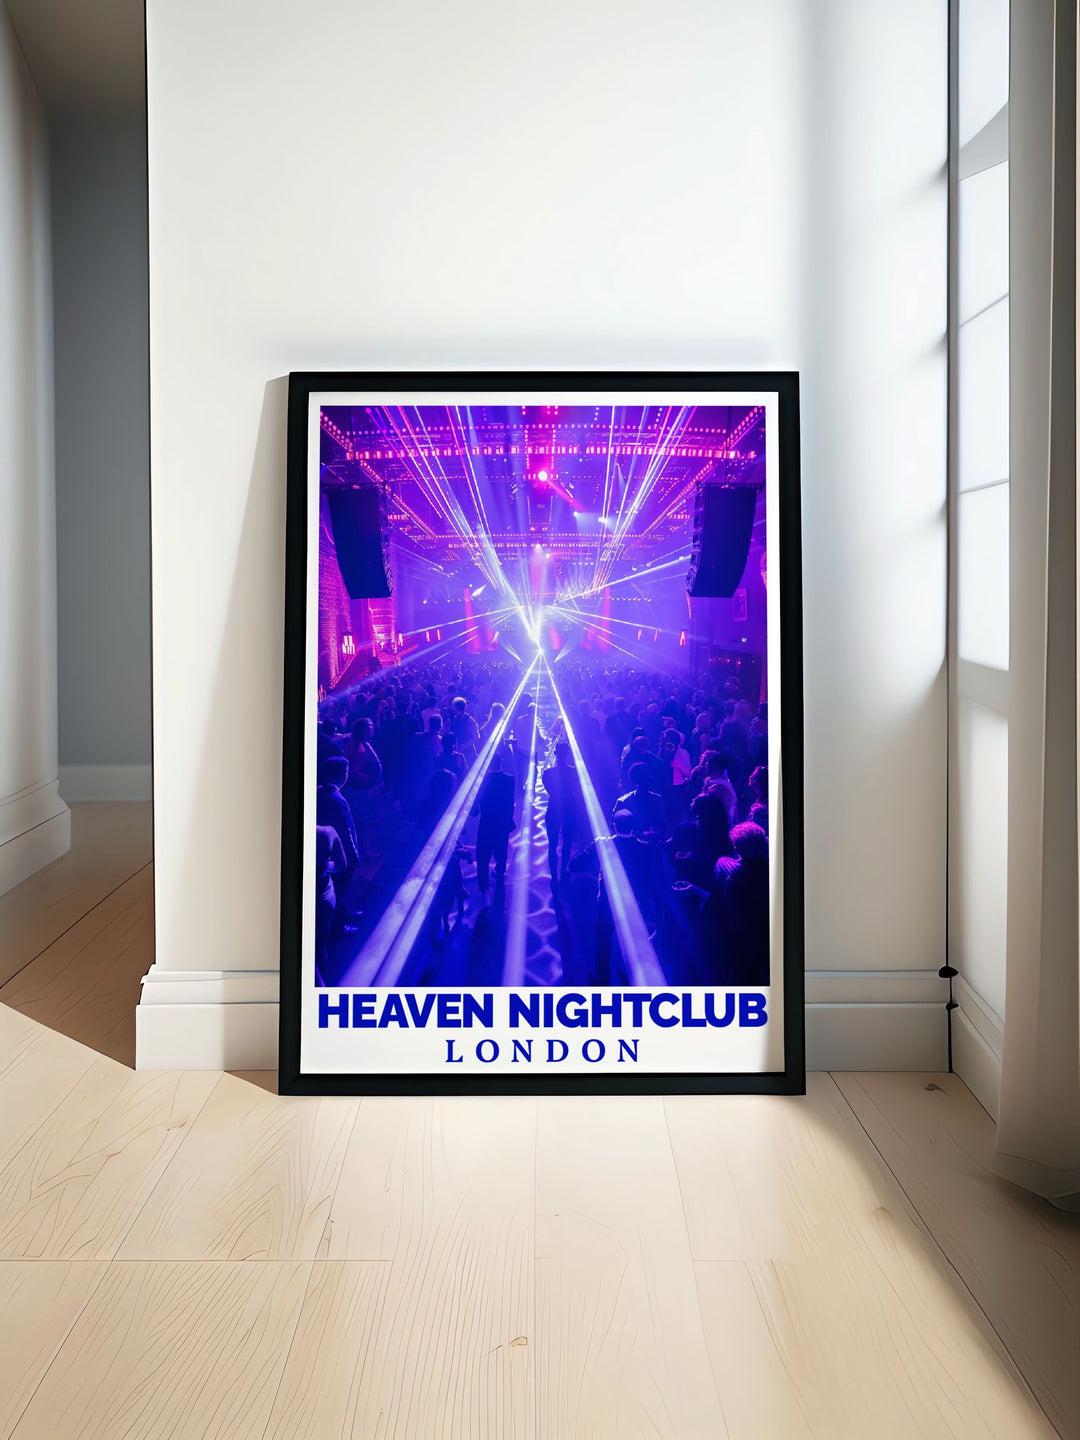 Featuring Heaven Nightclubs dynamic dance floor, this art print highlights the vibrant atmosphere and cultural heritage of one of Londons most famous nightclubs.